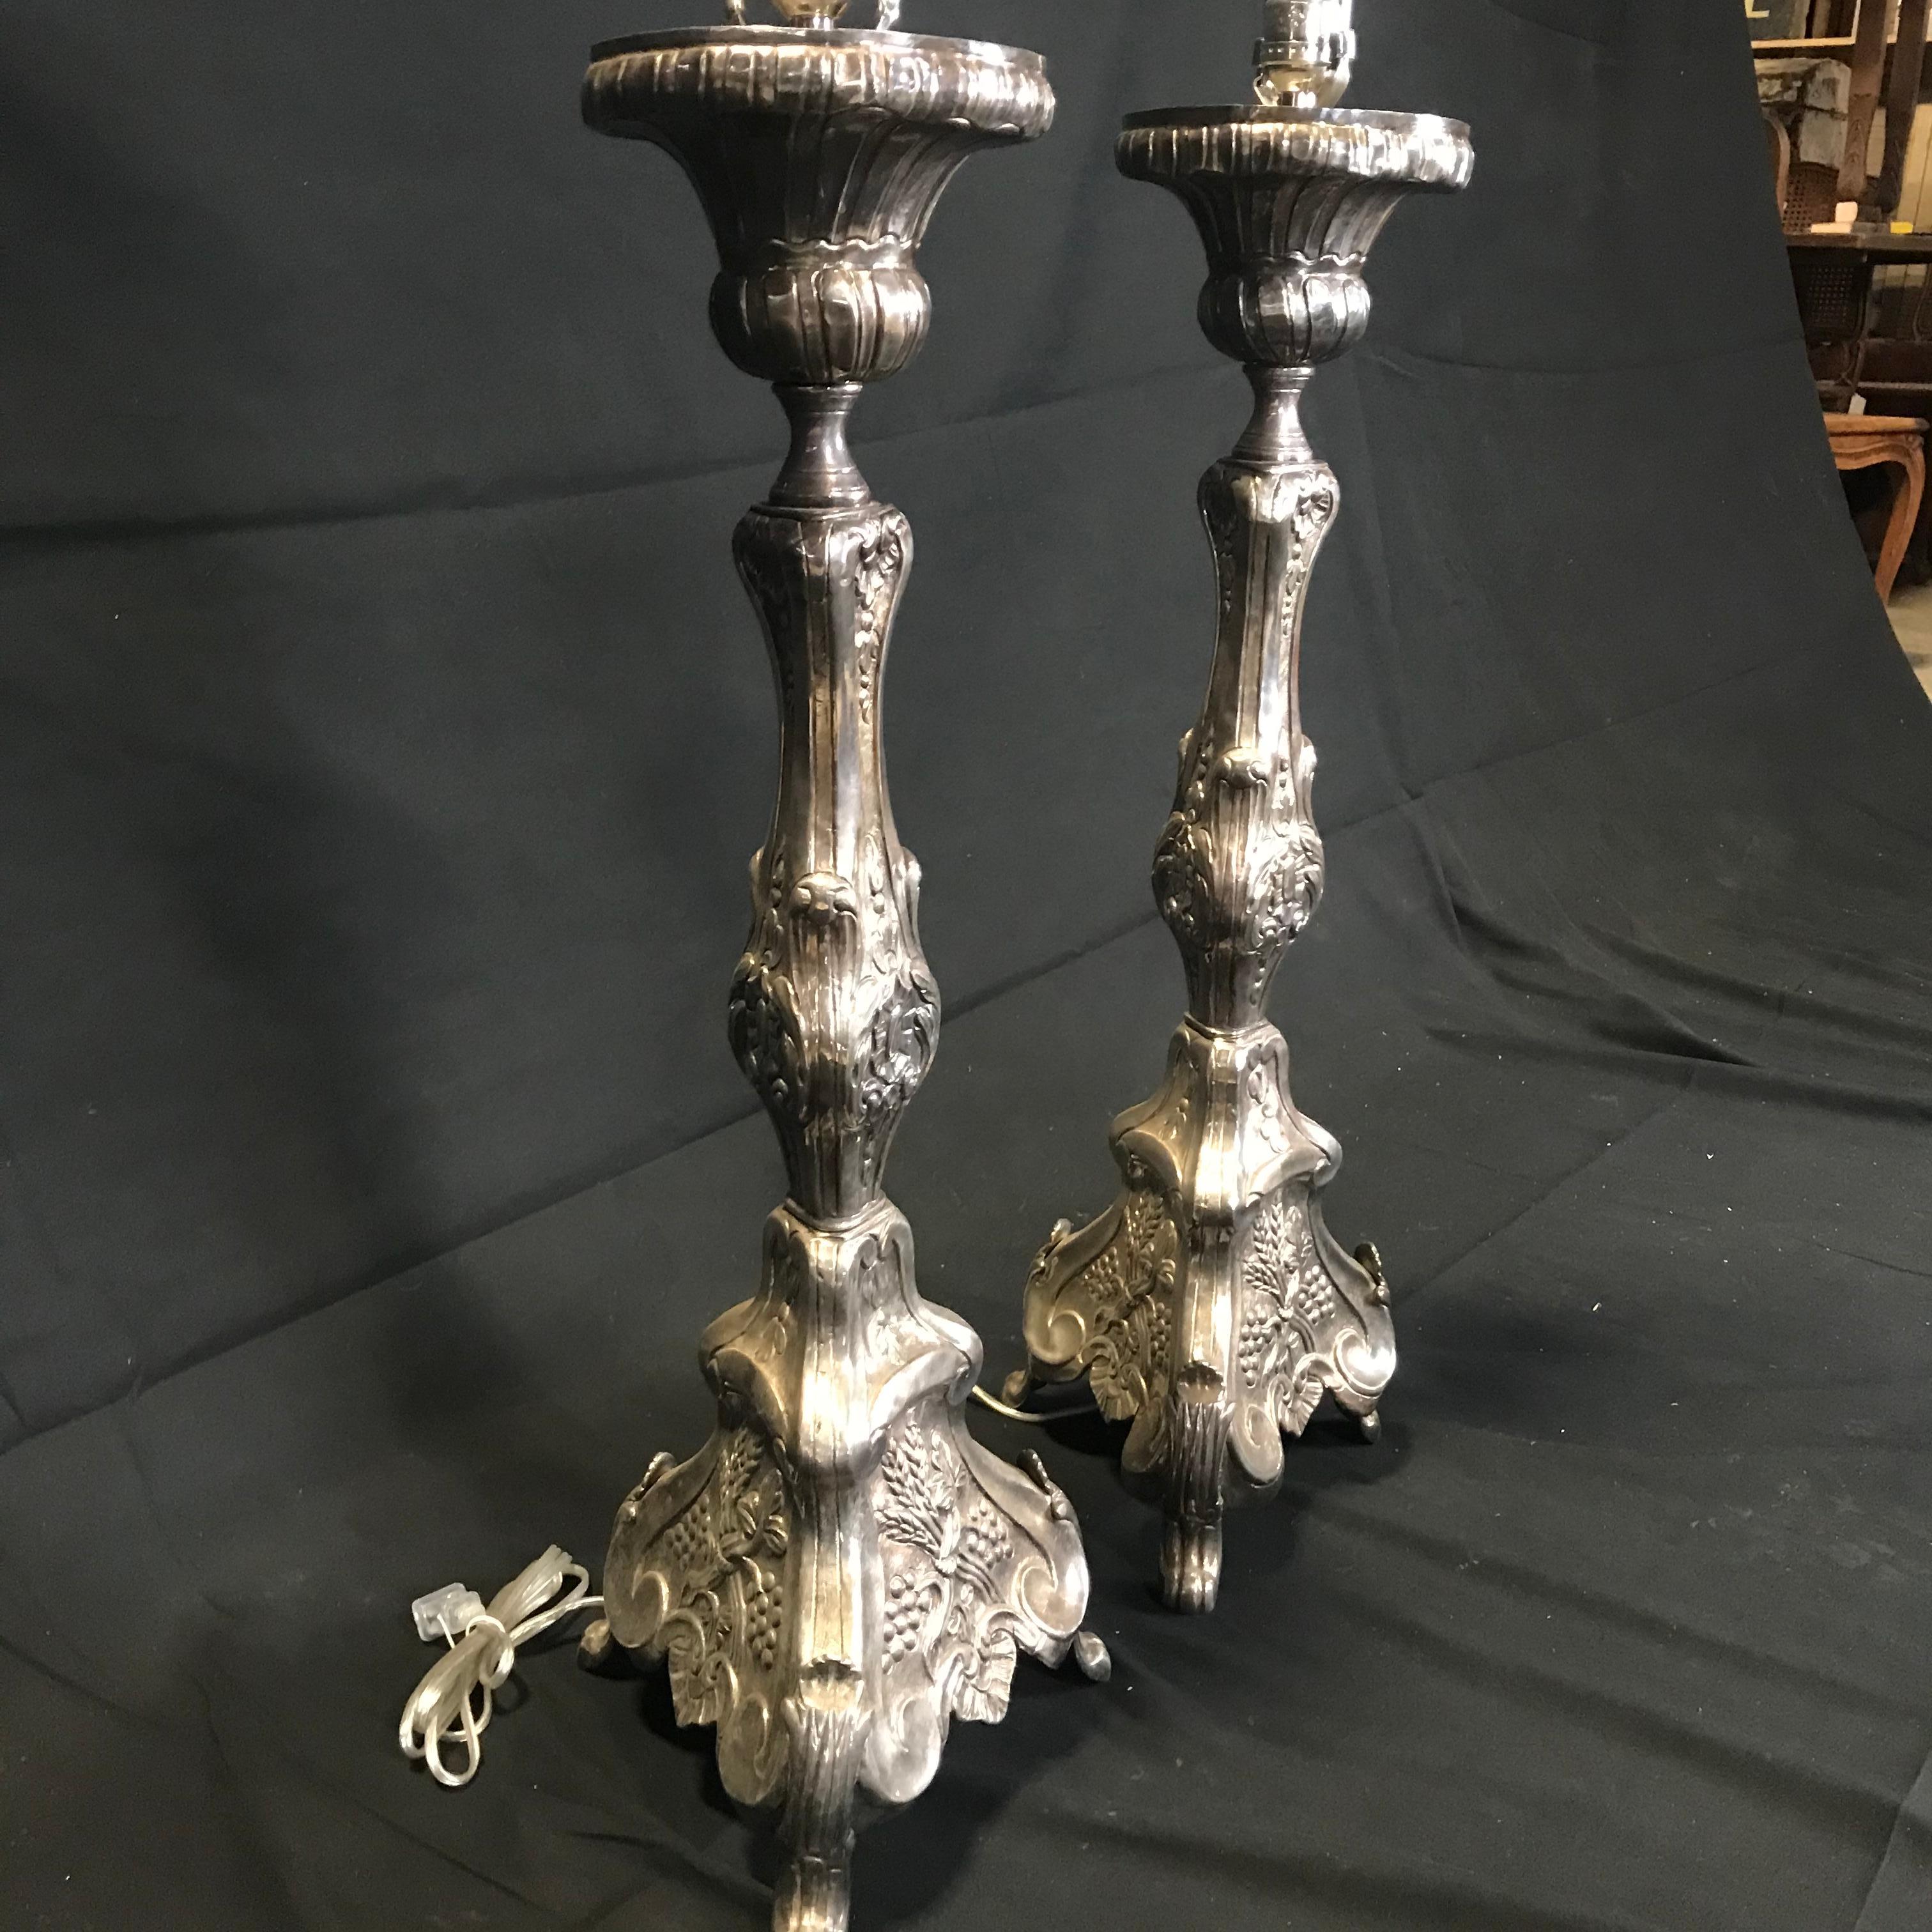 Superb pair of 19th century French silvered bronze altar sticks made into lamps, having finely cast detailing. Each candlestick features a central shaft adorned in a seashell motif, fluted sides and richly adorned tripod base with foliage motifs